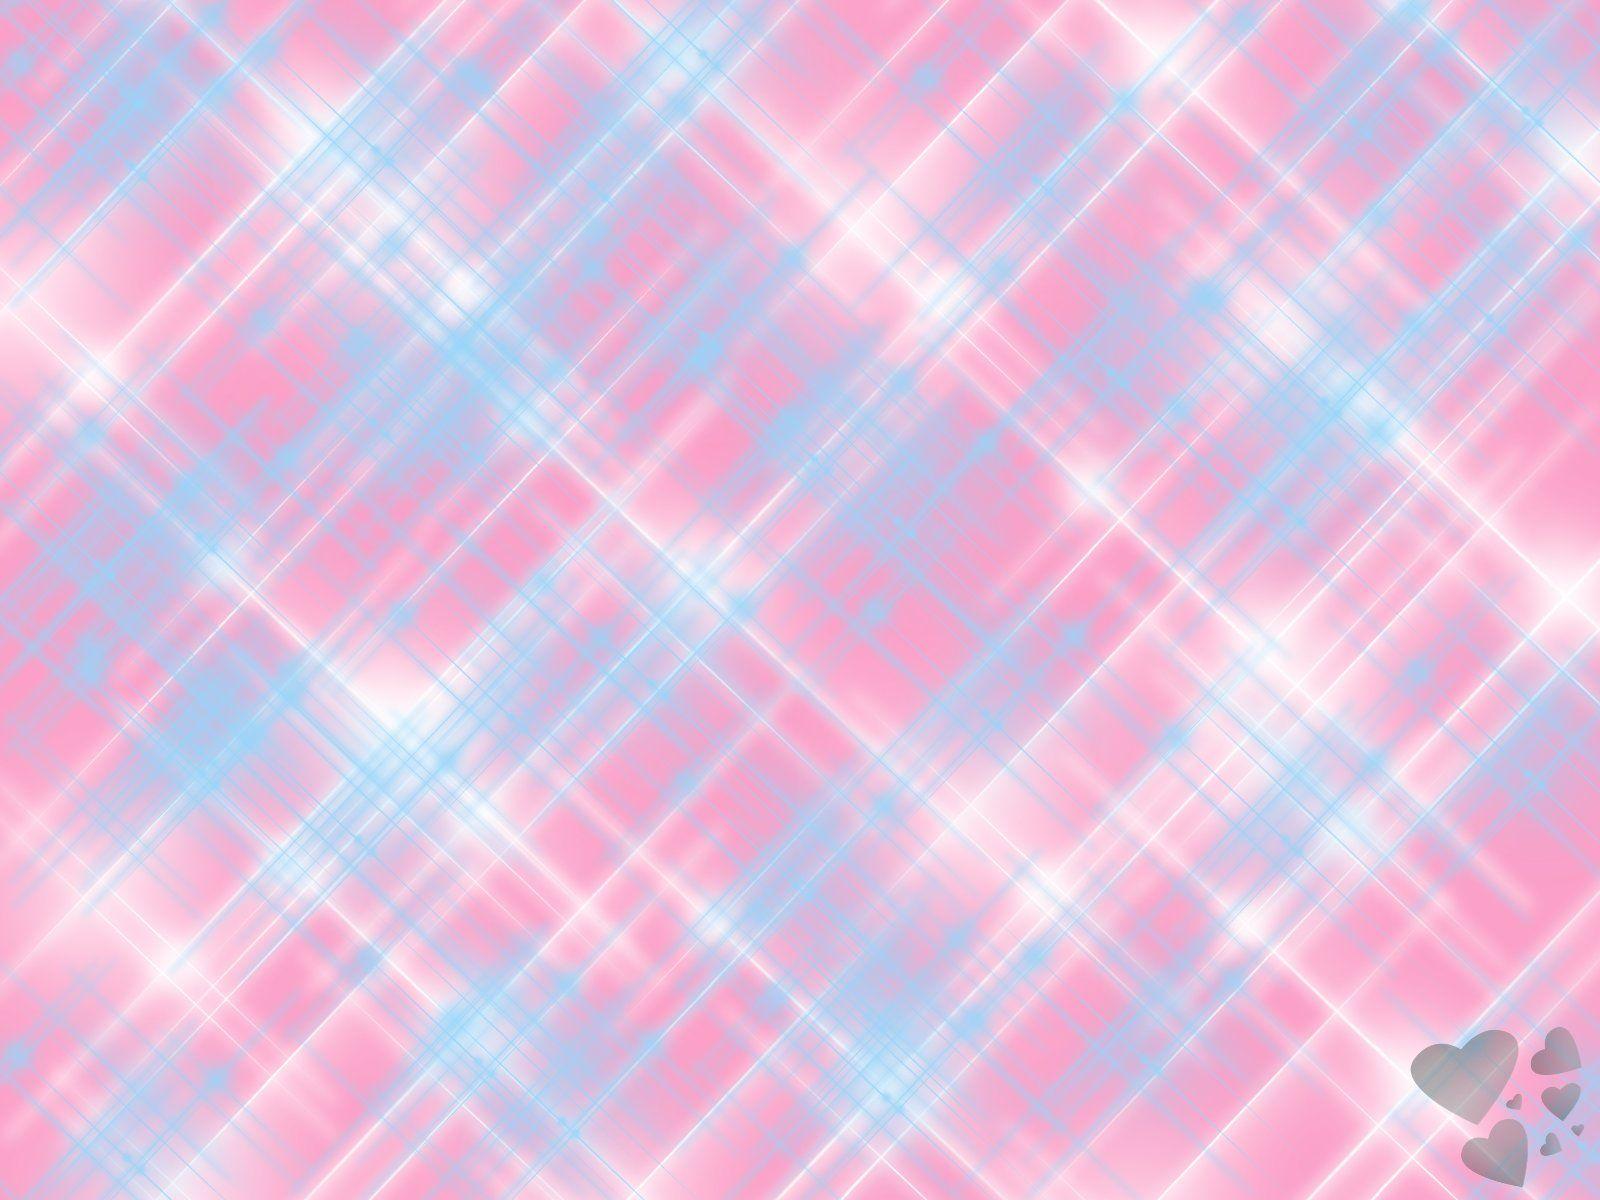 Light Blue and Pink, HD Widescreen Wallpaper For Free